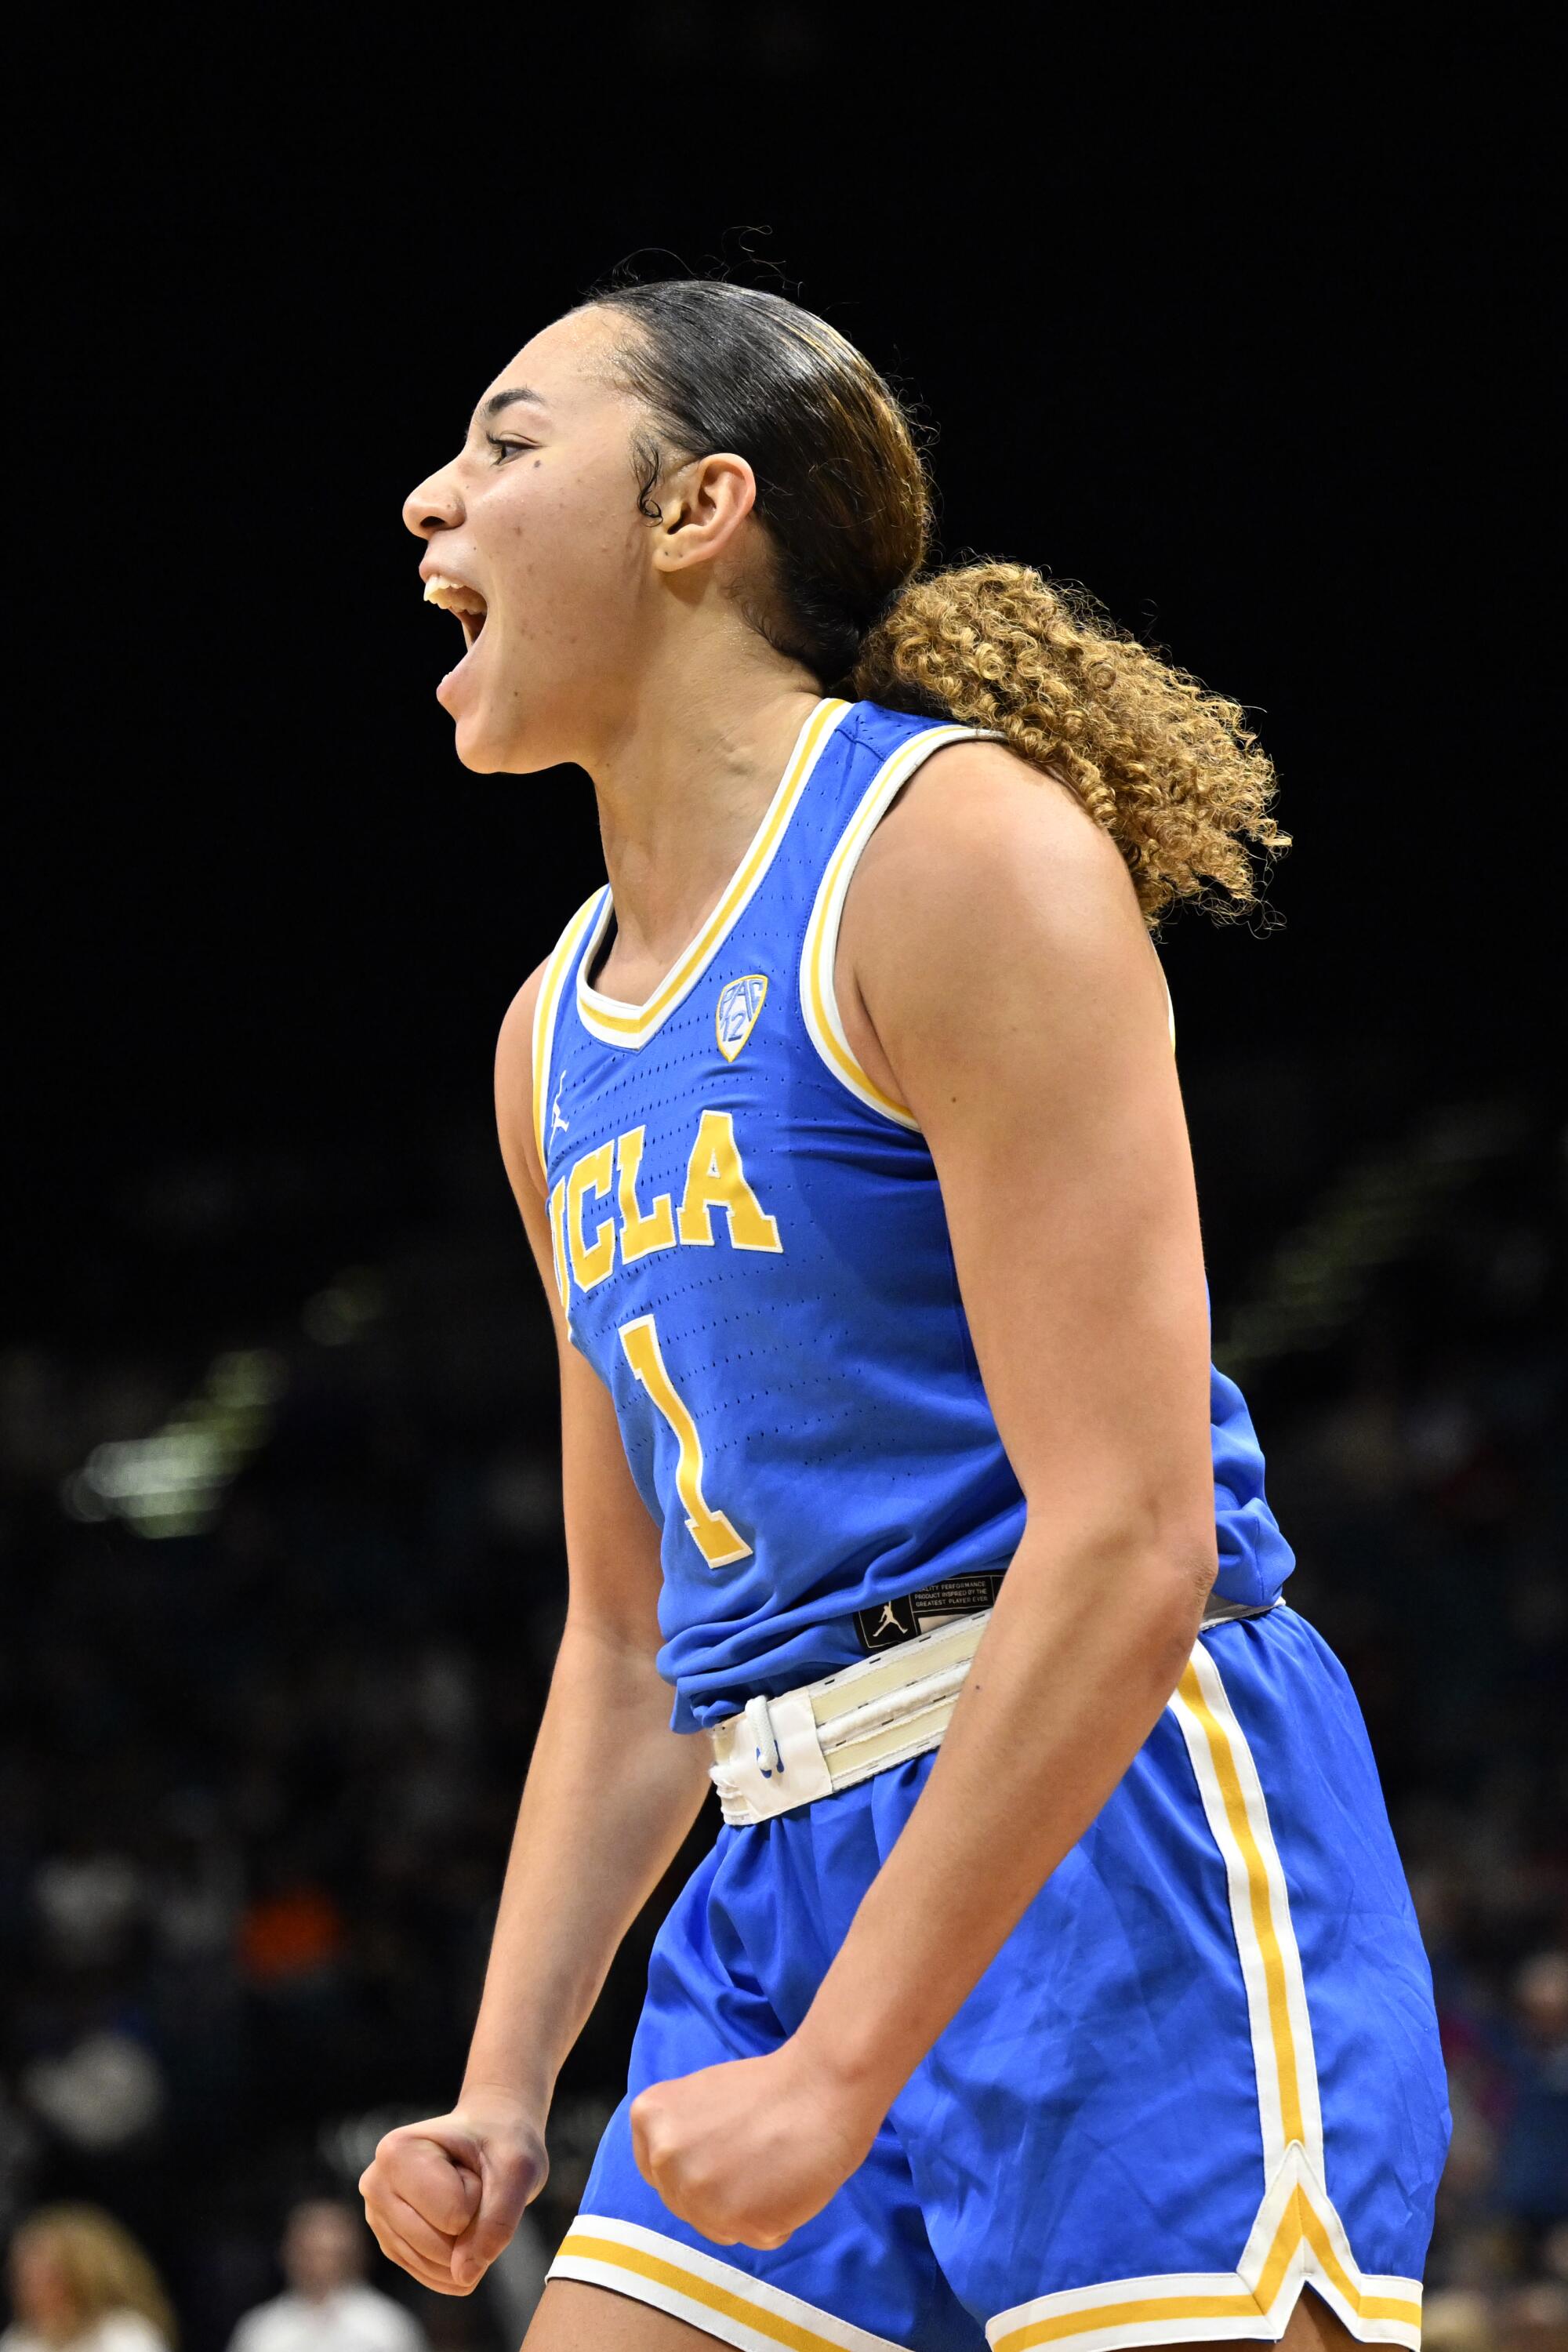 UCLA guard Kiki Rice is fired up during a game against USC in the women's Pac-12 tournament on March 8.